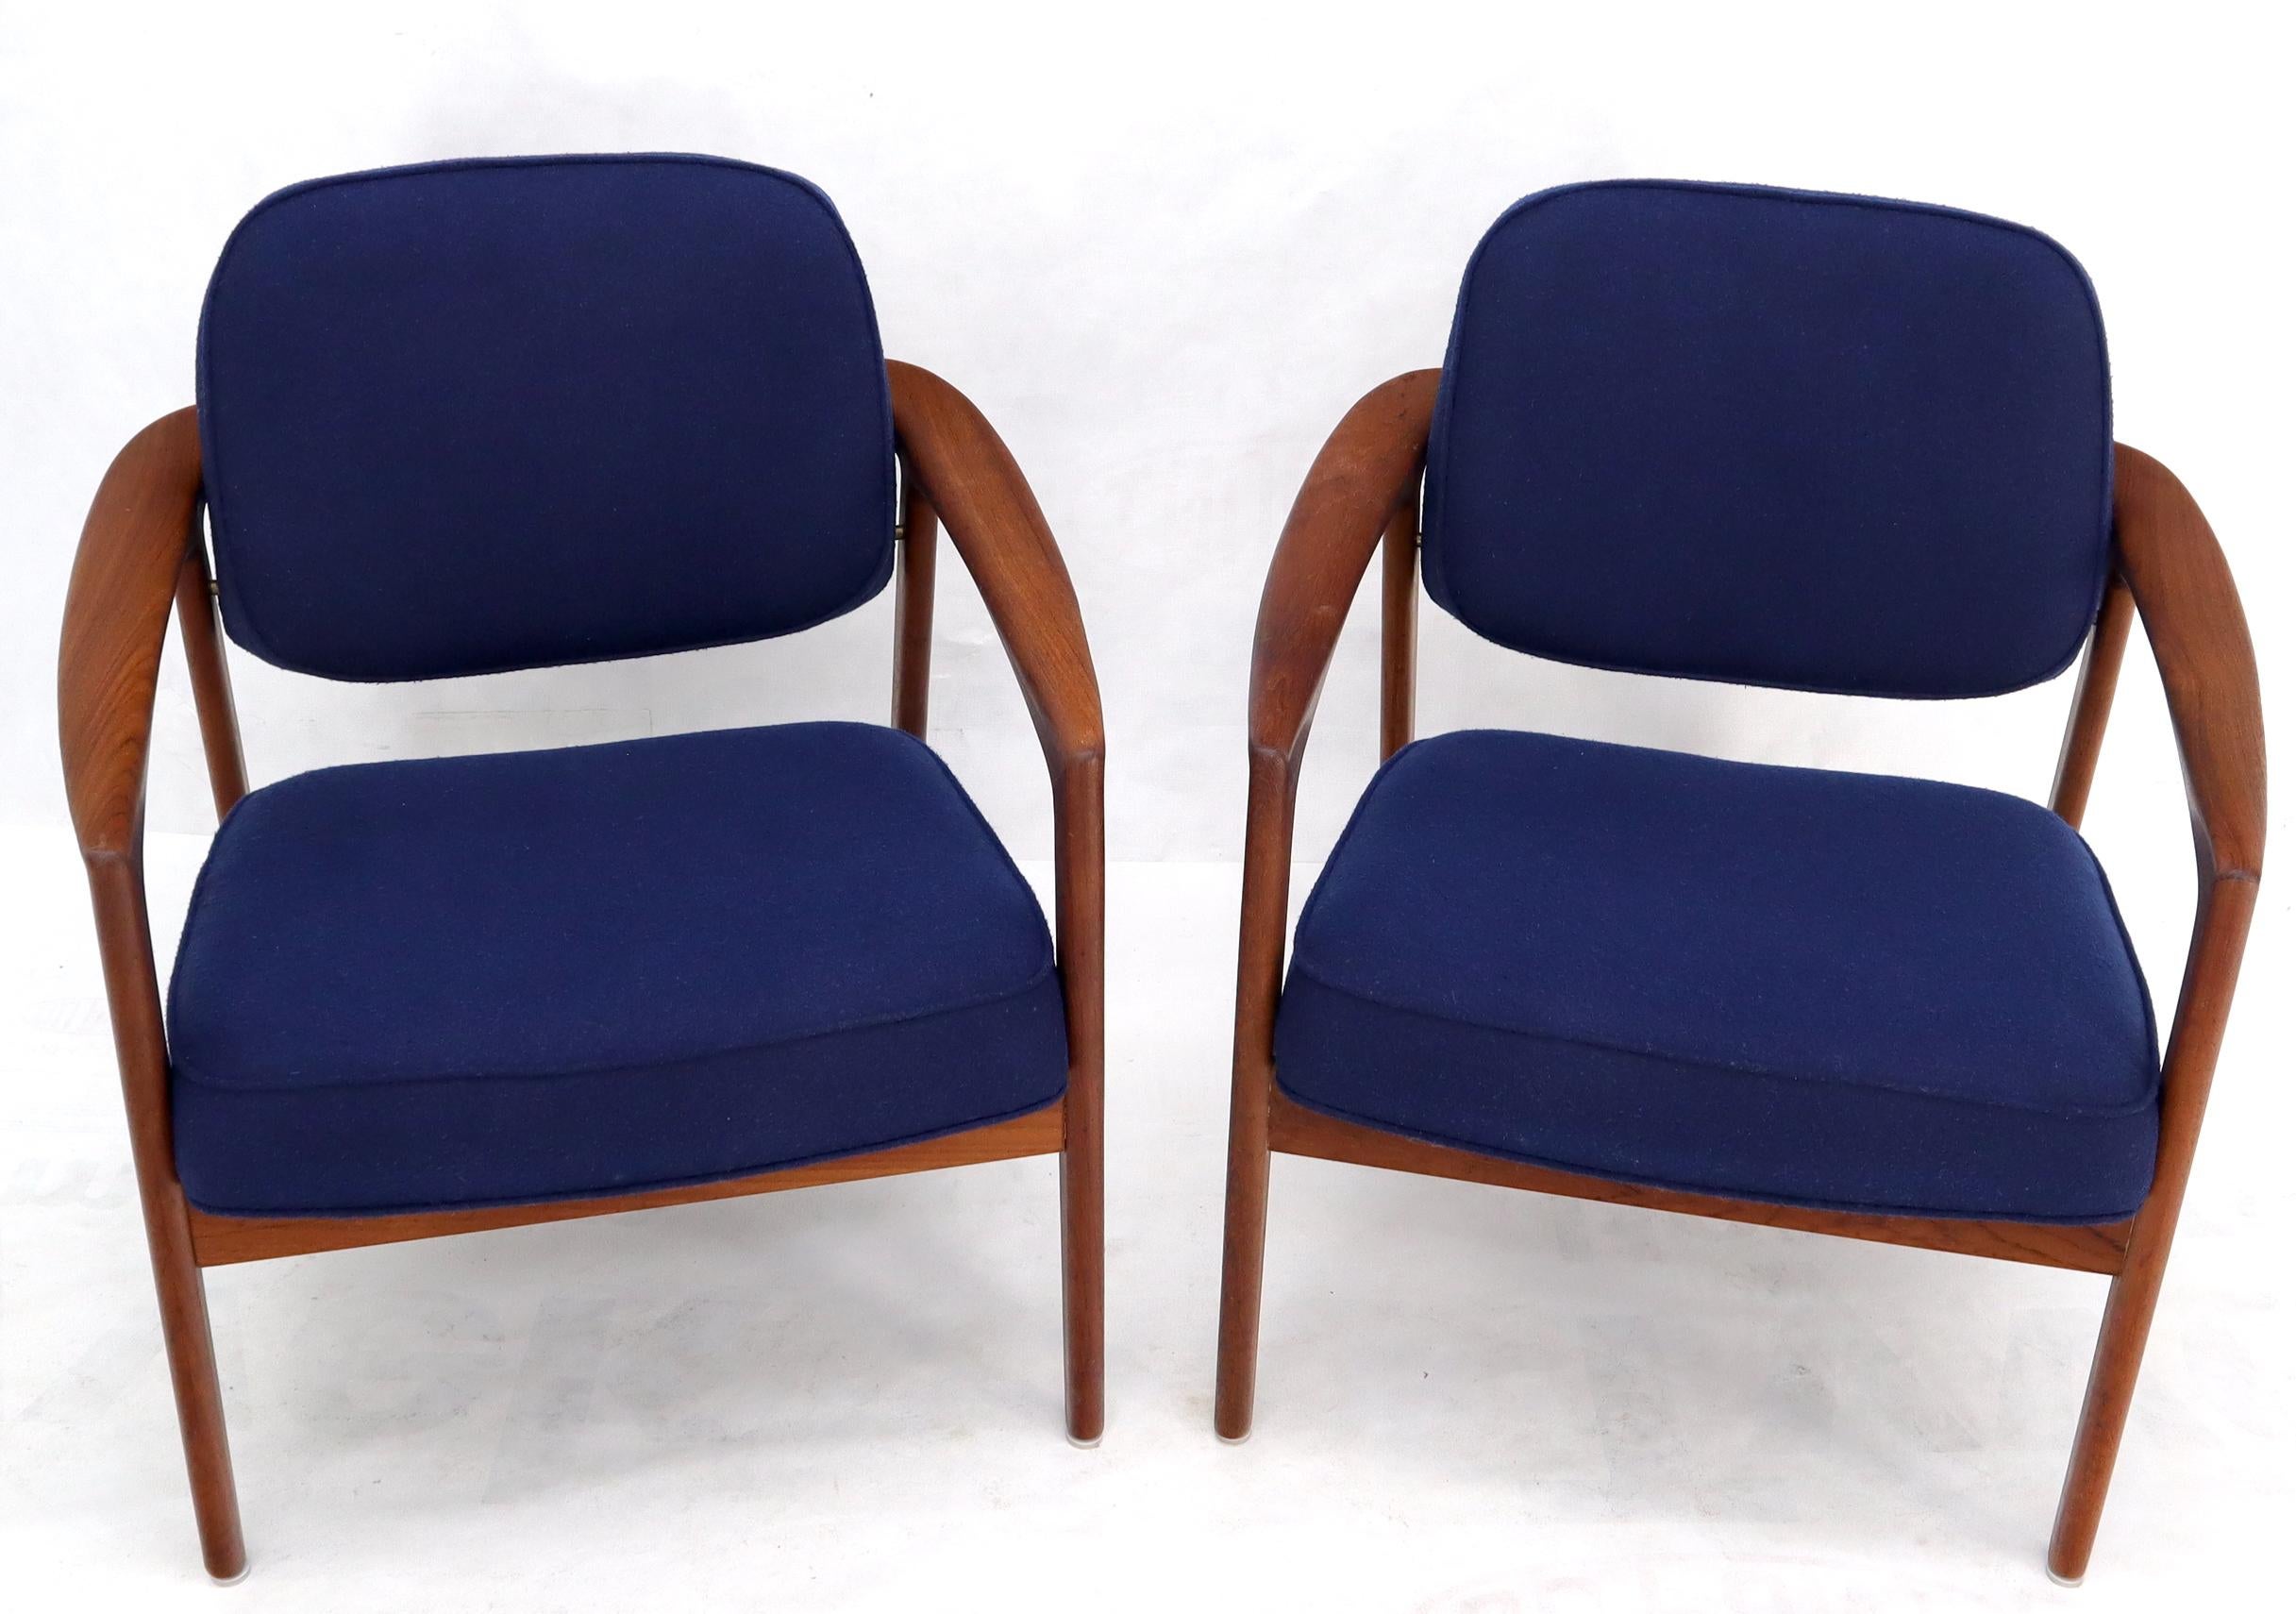 20th Century Pair of New Blue Upholstery Teak Danish Mid-Century Modern Arm Lounge Chairs For Sale